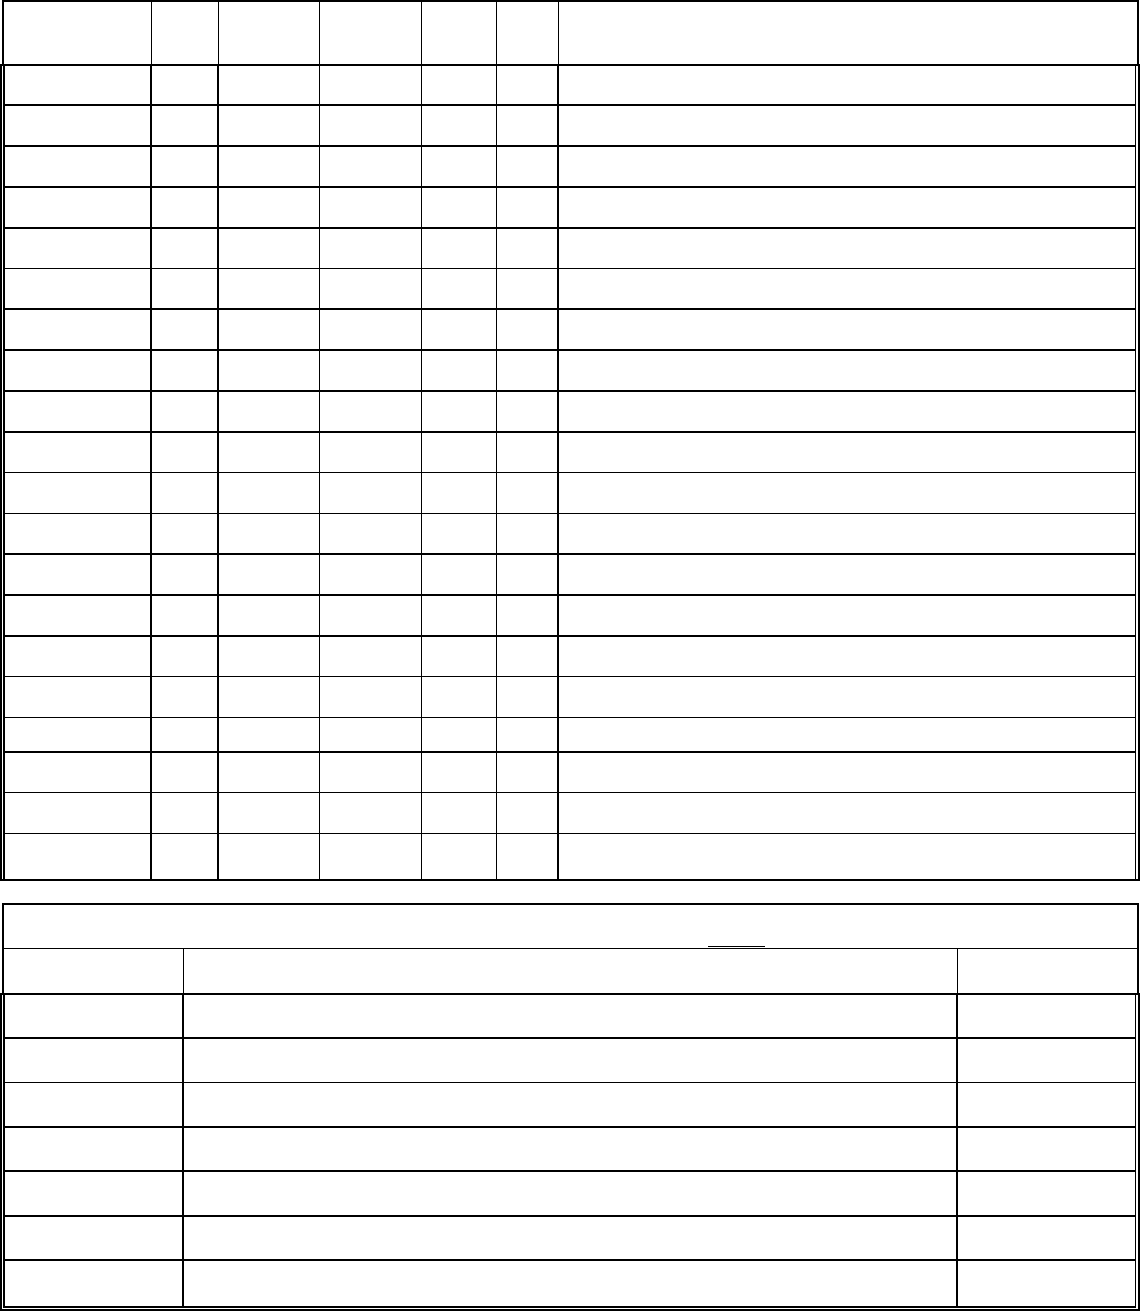 case-log-sheet-in-word-and-pdf-formats-page-2-of-2